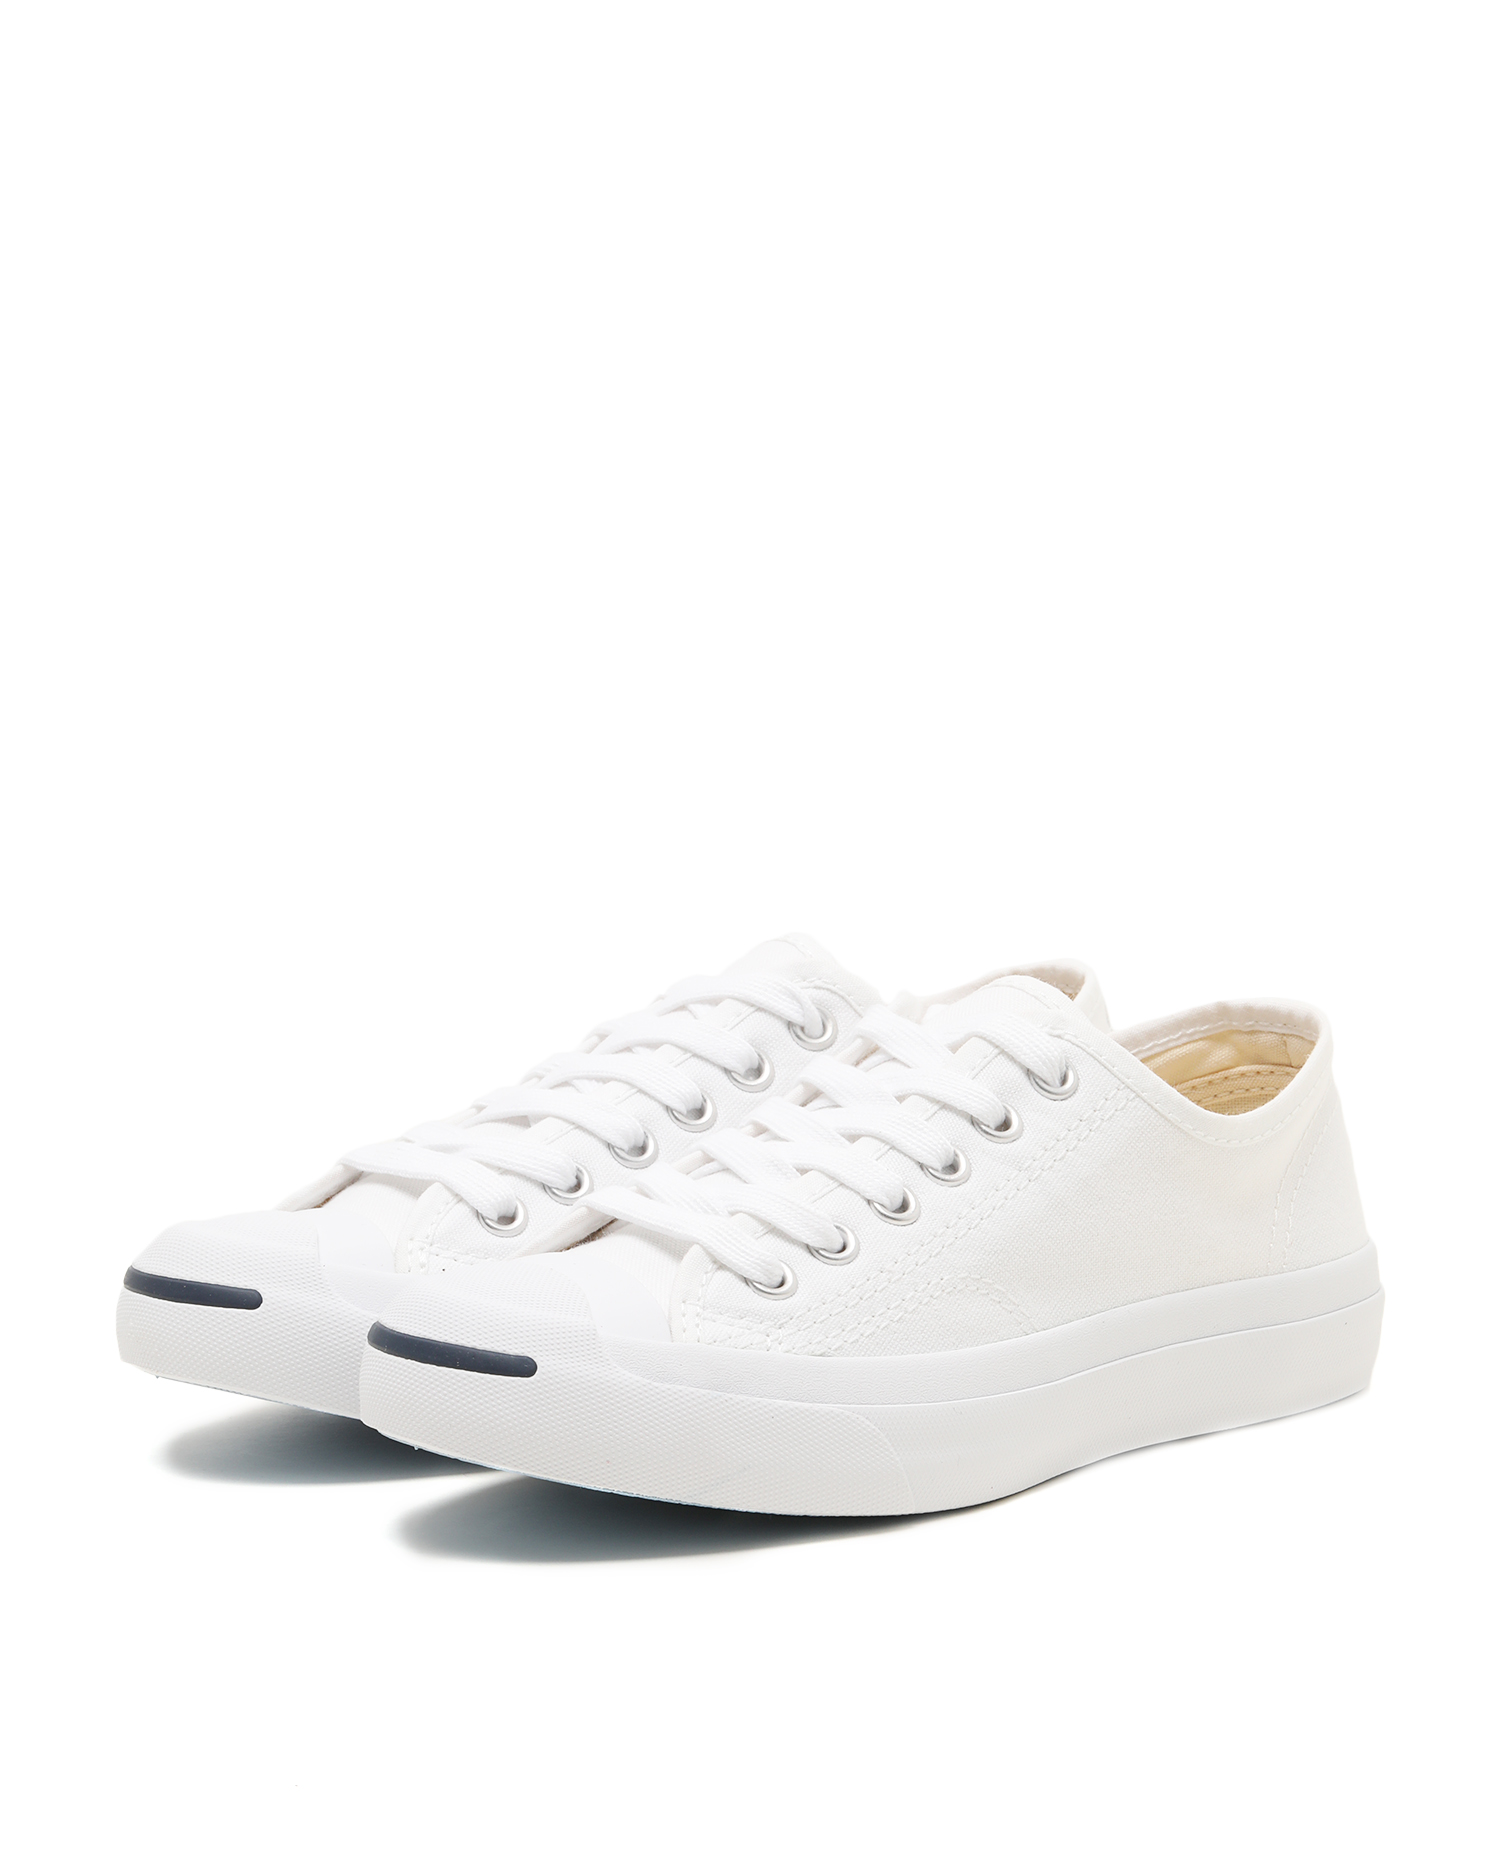 CONVERSE Jack Purcell canvas sneakers